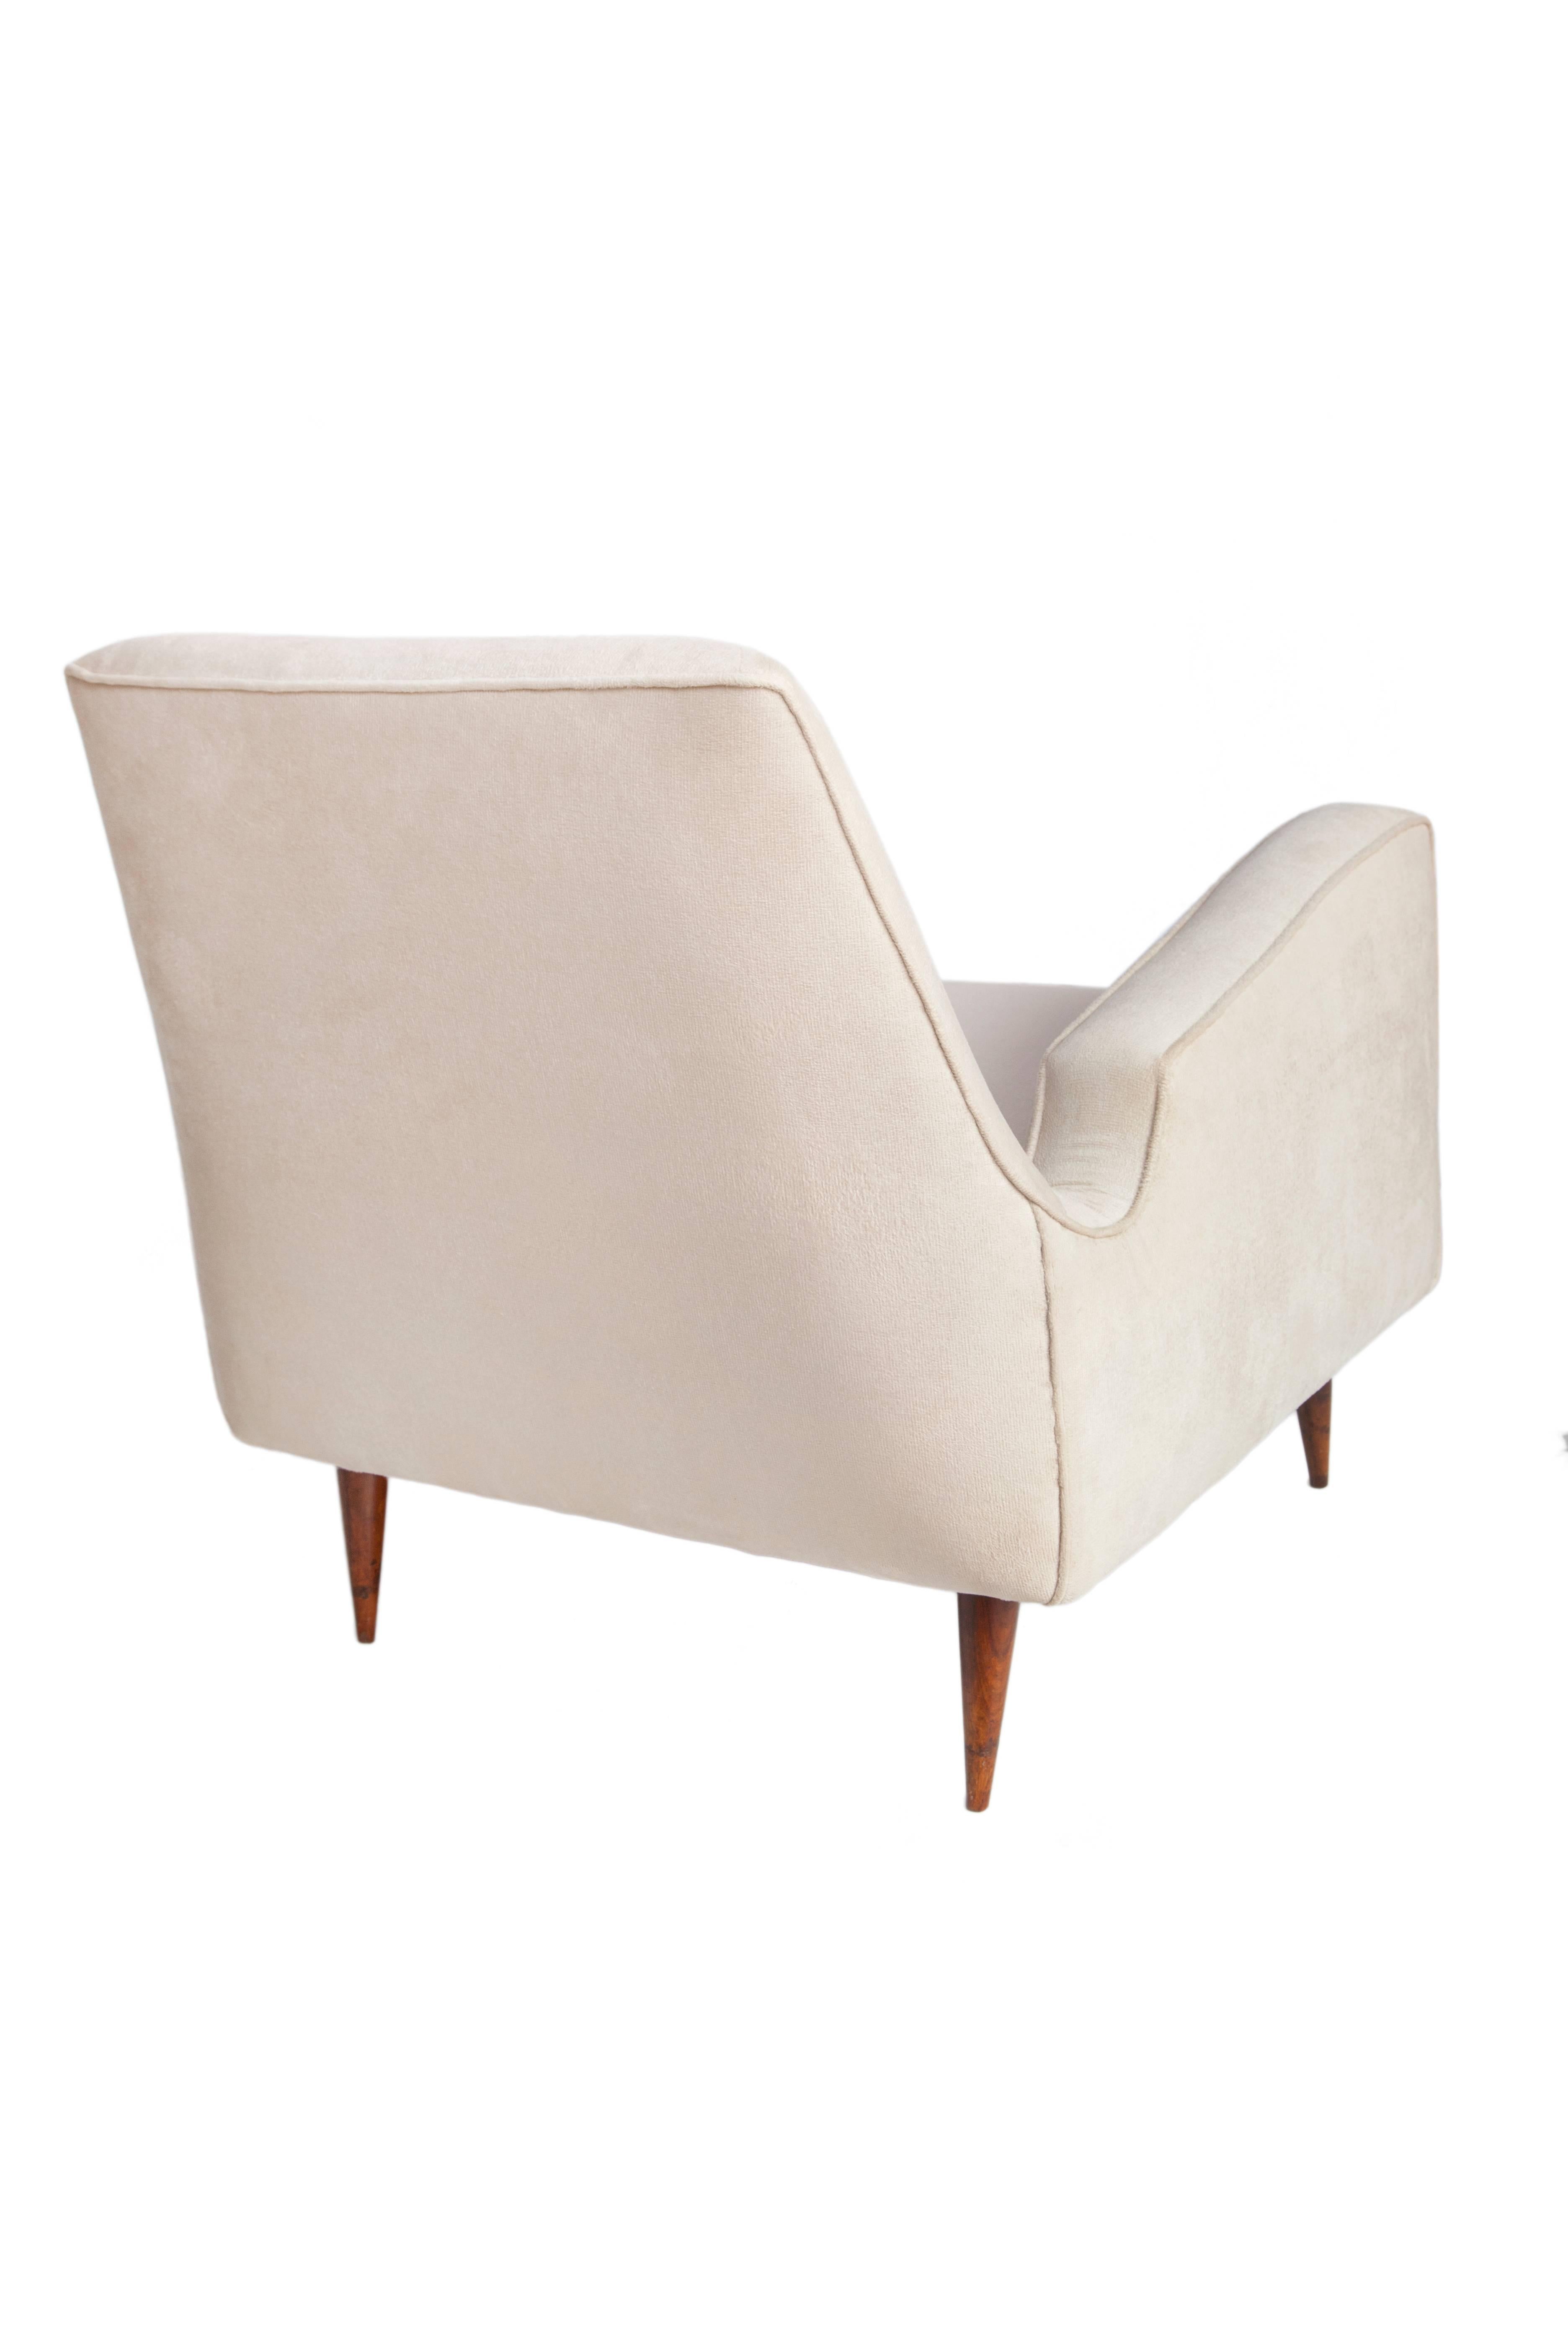 Brazilian Mid-Century Modern Armchairs in Artificial Suede 2